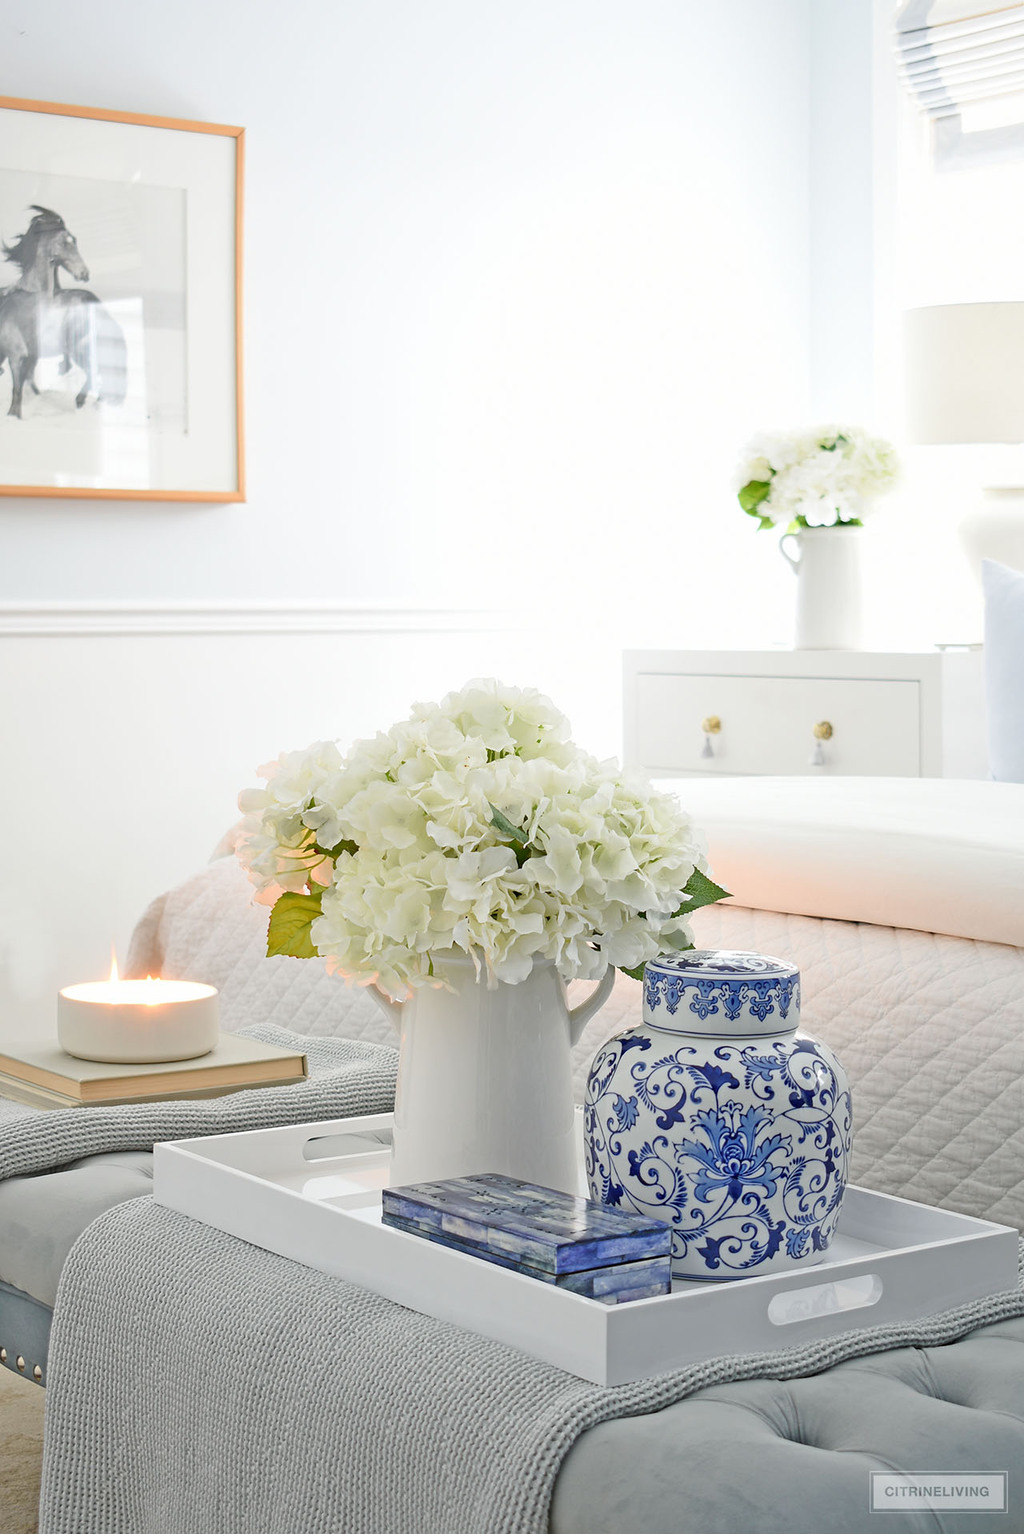 A chic white tray styled with a white vase filled with faux hydrangeas, a blue and white ginger jar and blue decorated box sit at the foot of the bed.